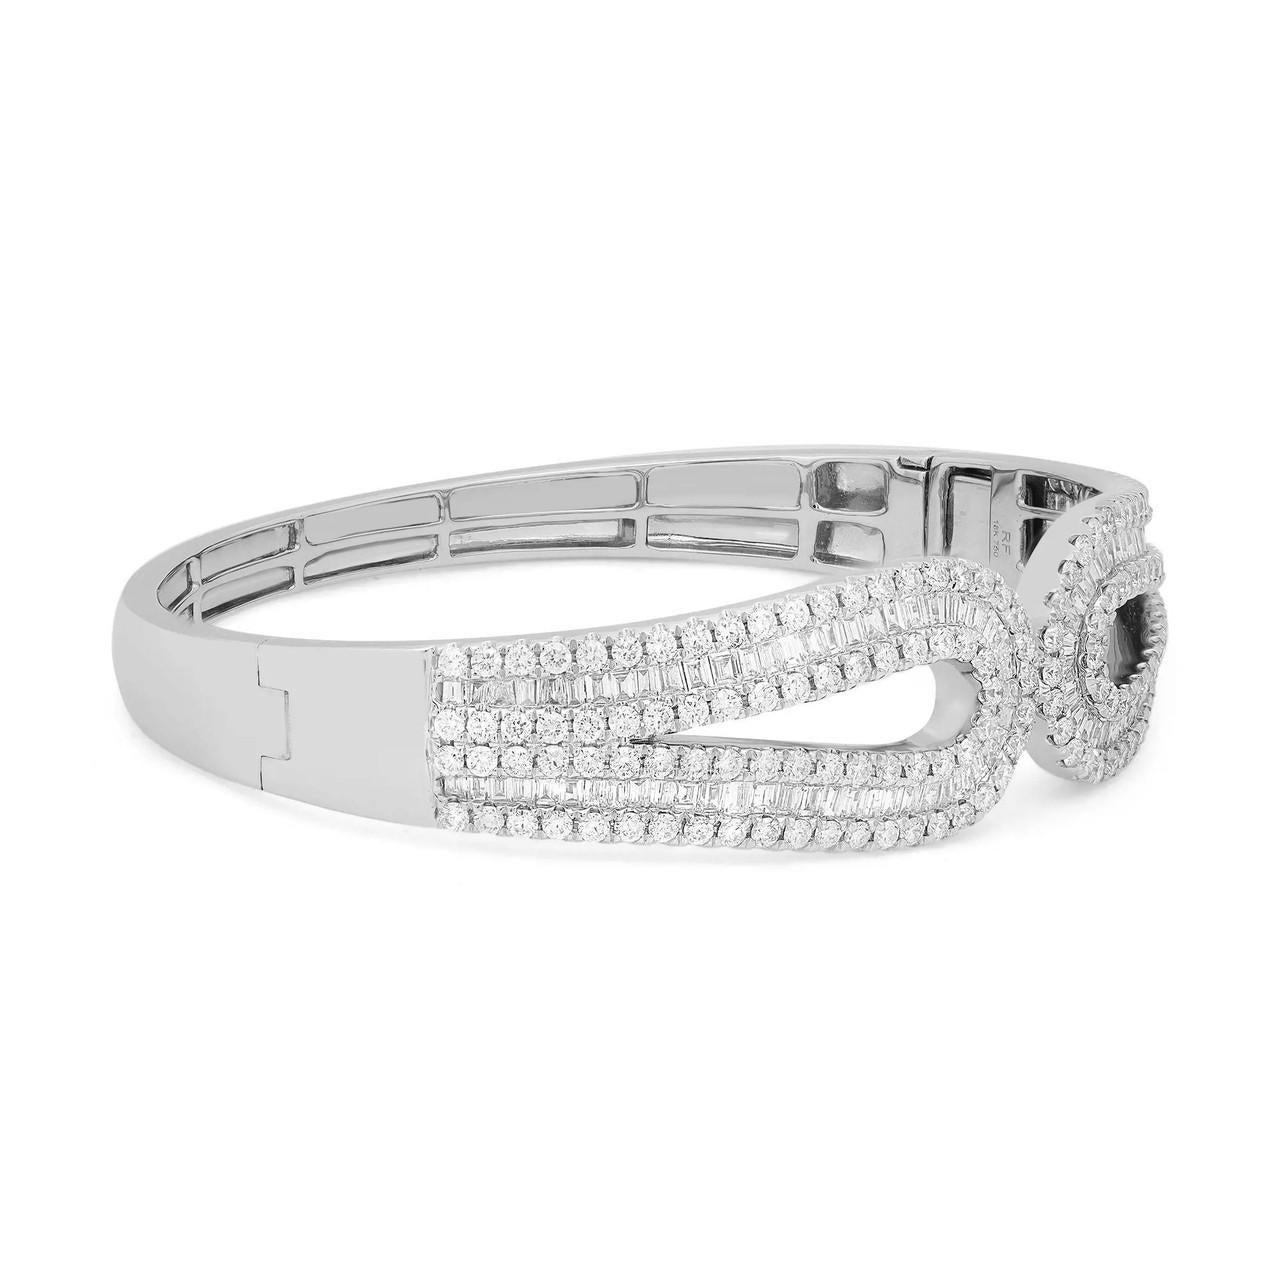 Introducing the captivating 4.63 Carat Baguette and Round Diamond Bracelet in 18k White Gold. This bracelet showcases a band of endless shimmer, created by the precise setting of slim diamond baguettes. The baguettes form a slim and elegant design